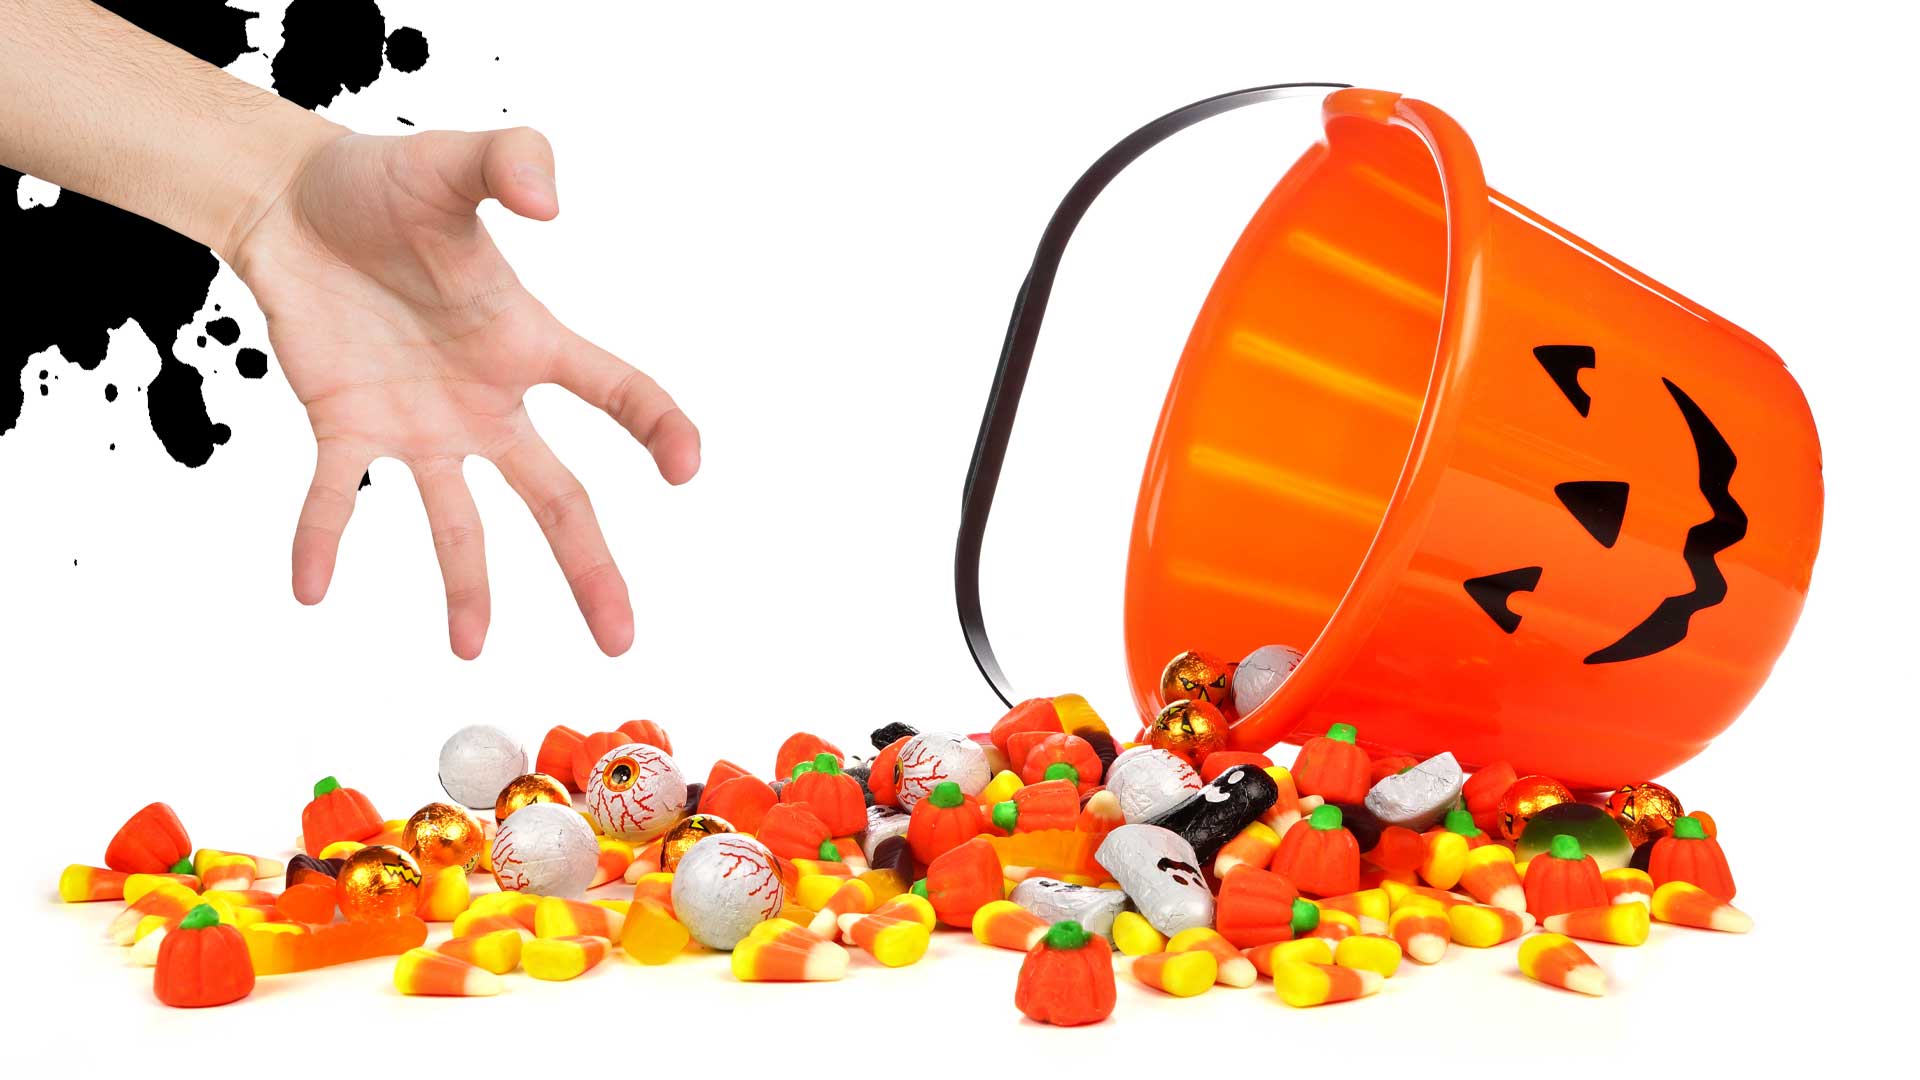 A hand reaching for a bucket of spilled Halloween sweets